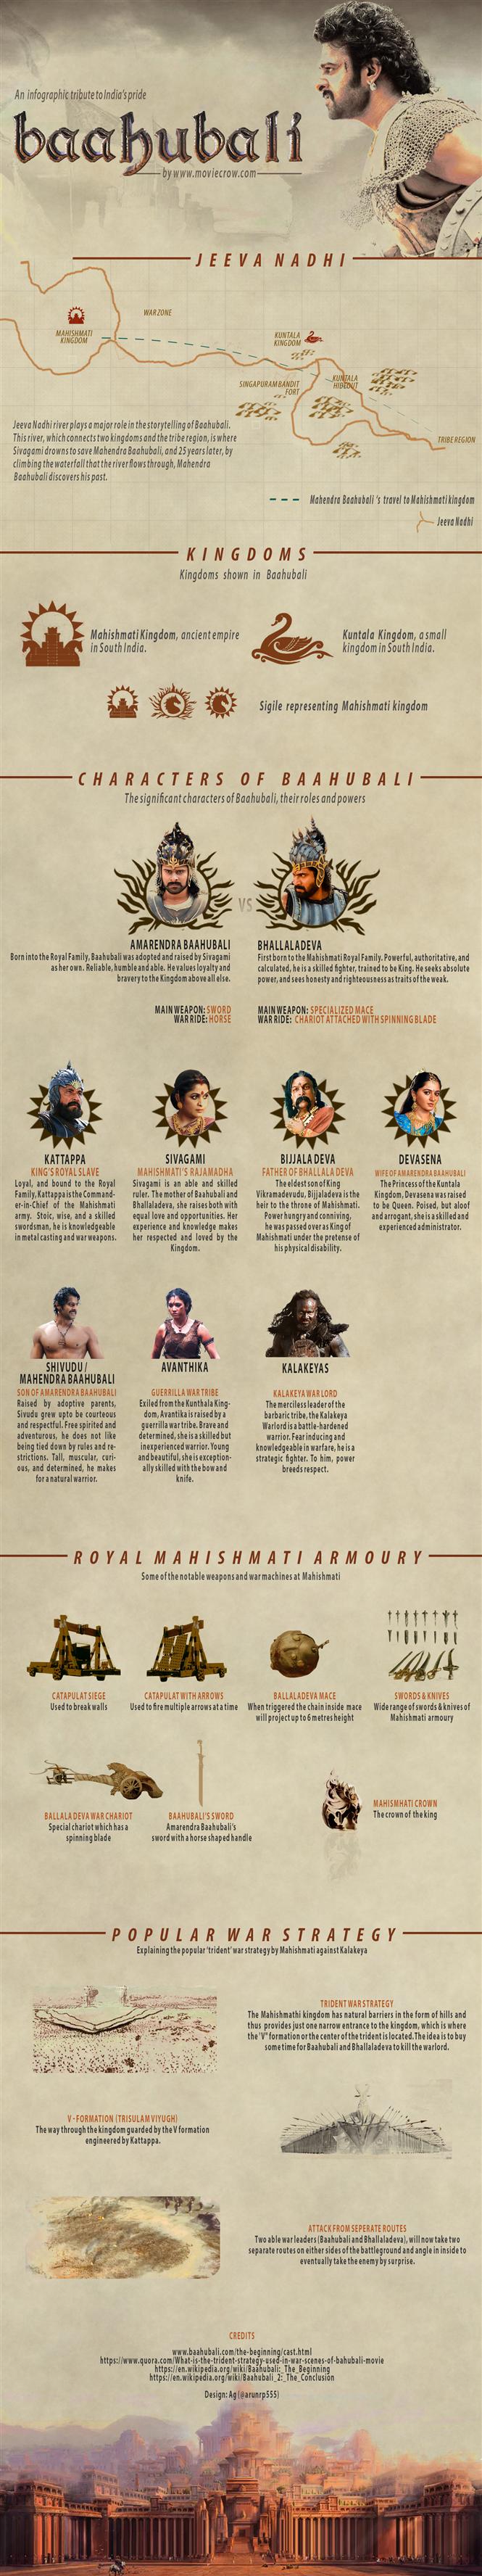 An infographic tribute to India's pride, Baahubali